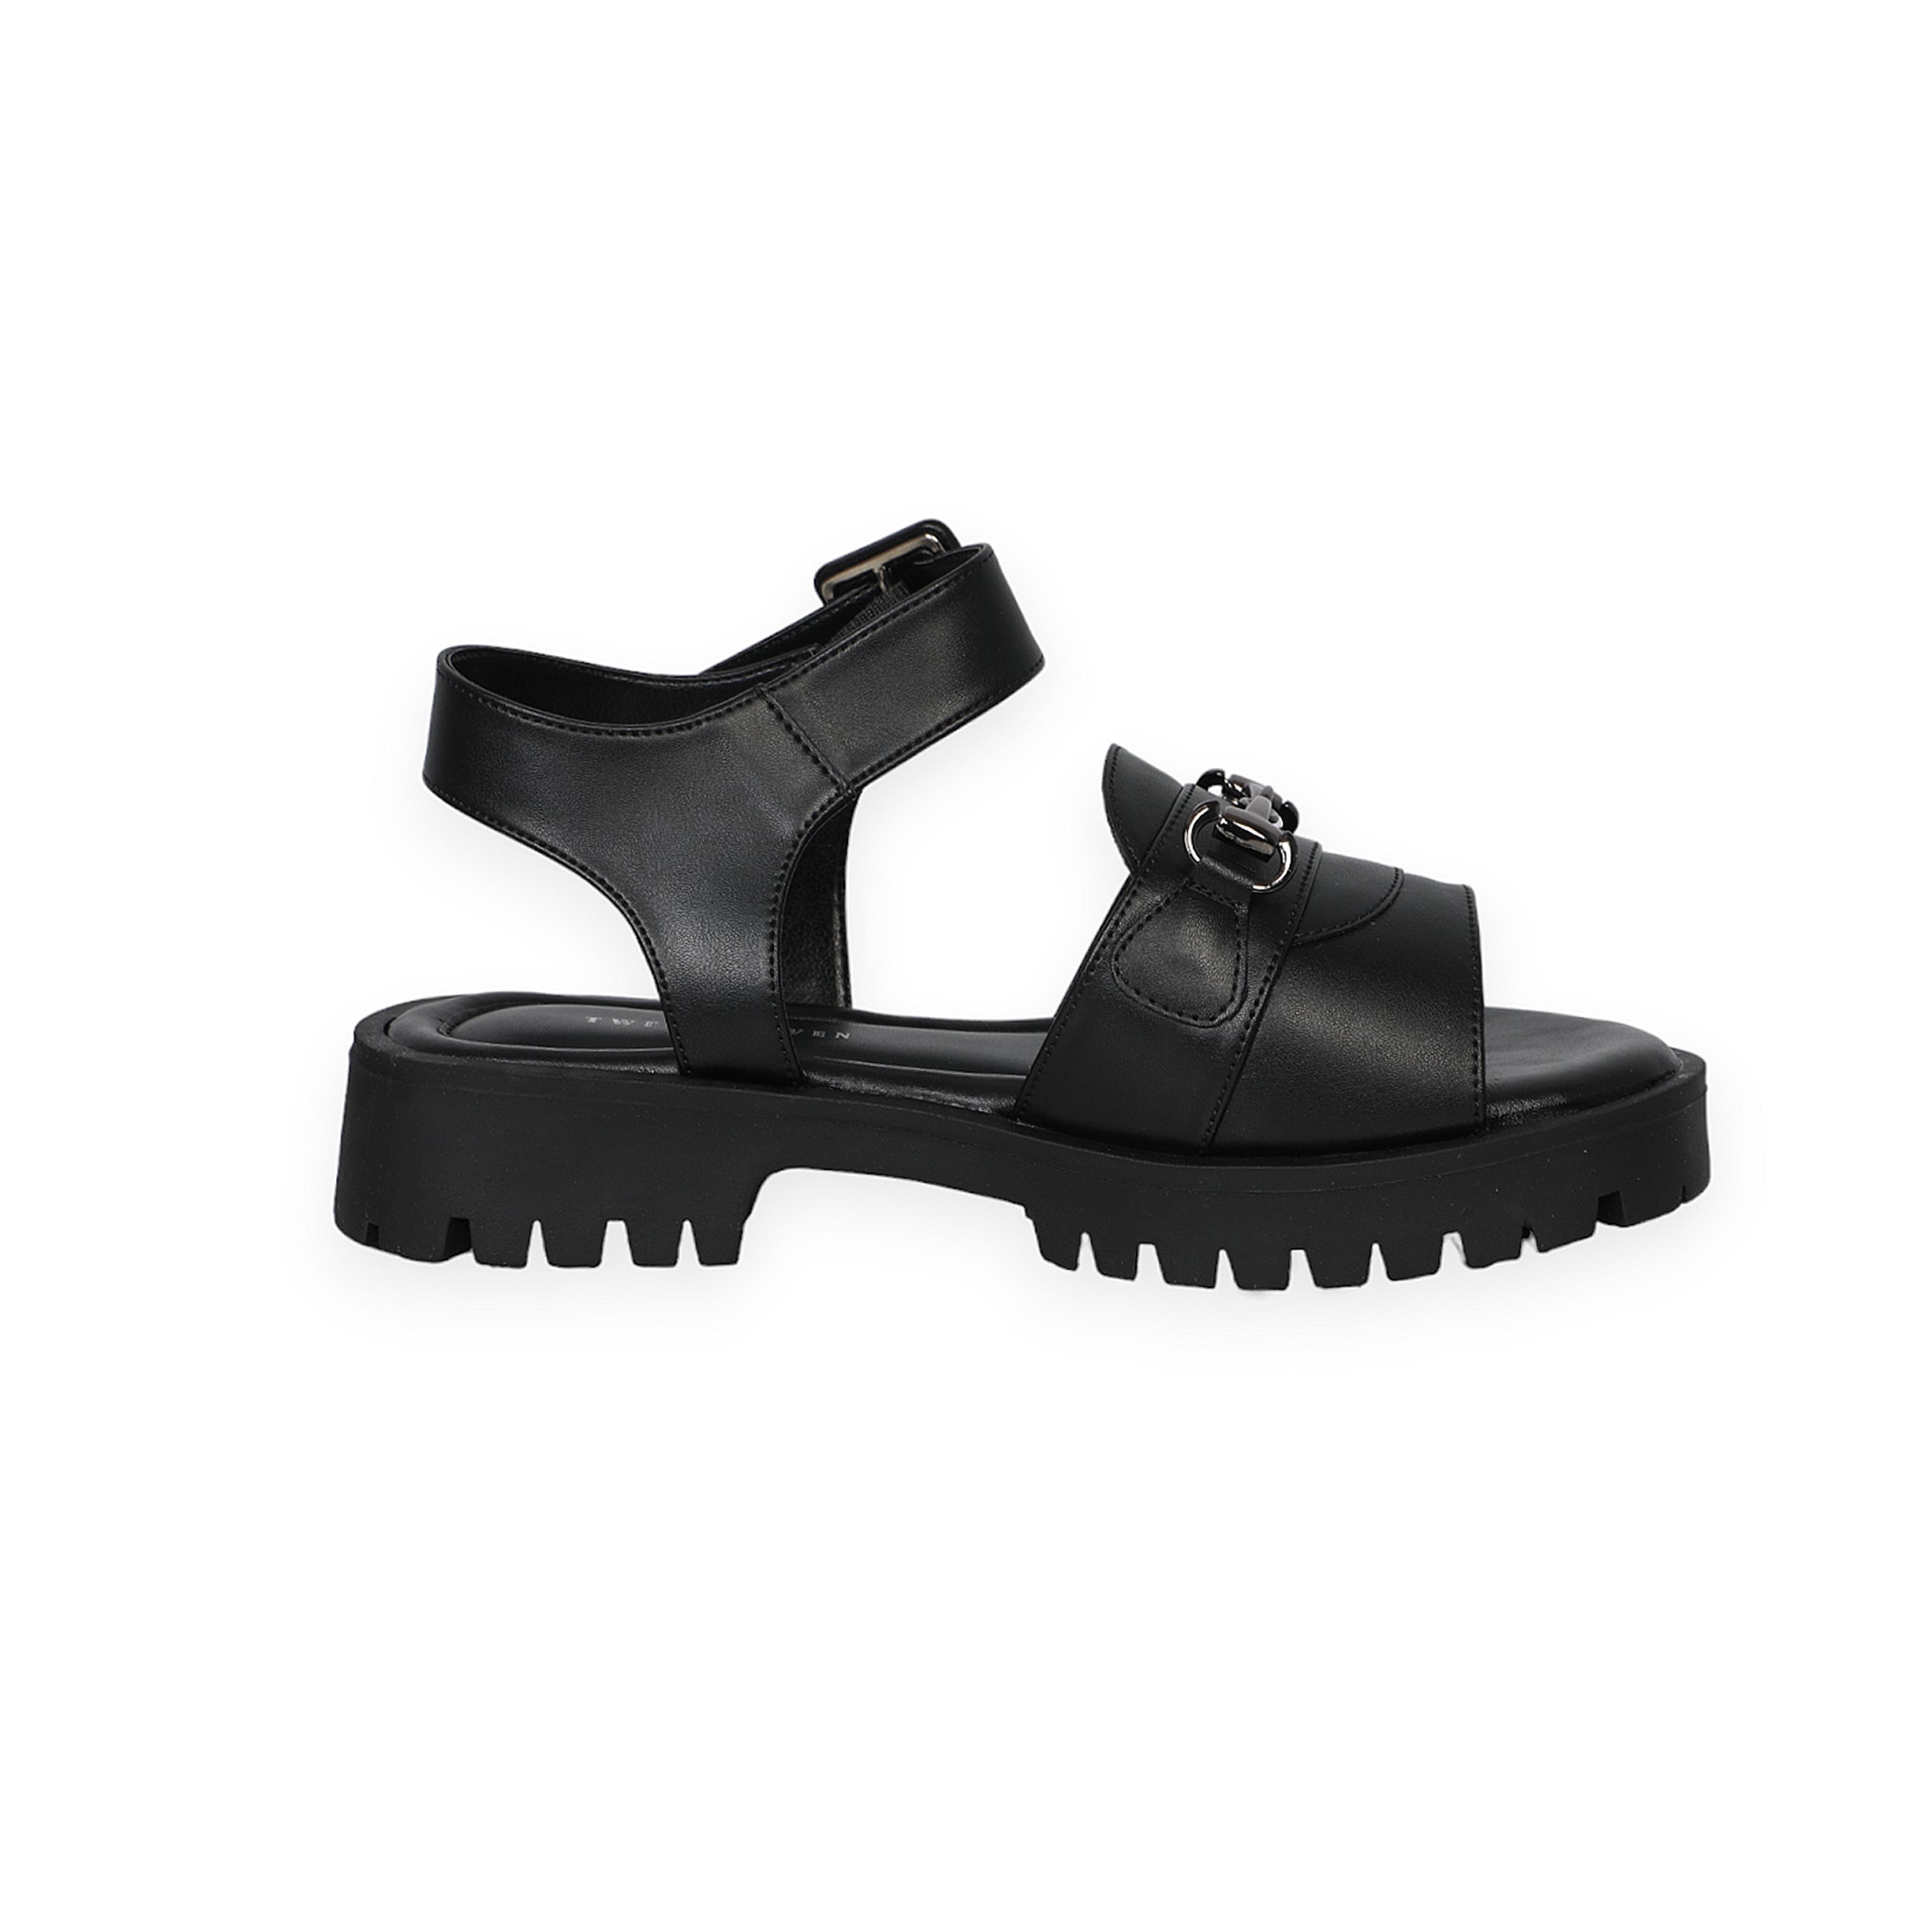 Black Women Sandals With Sole Ankle Strap